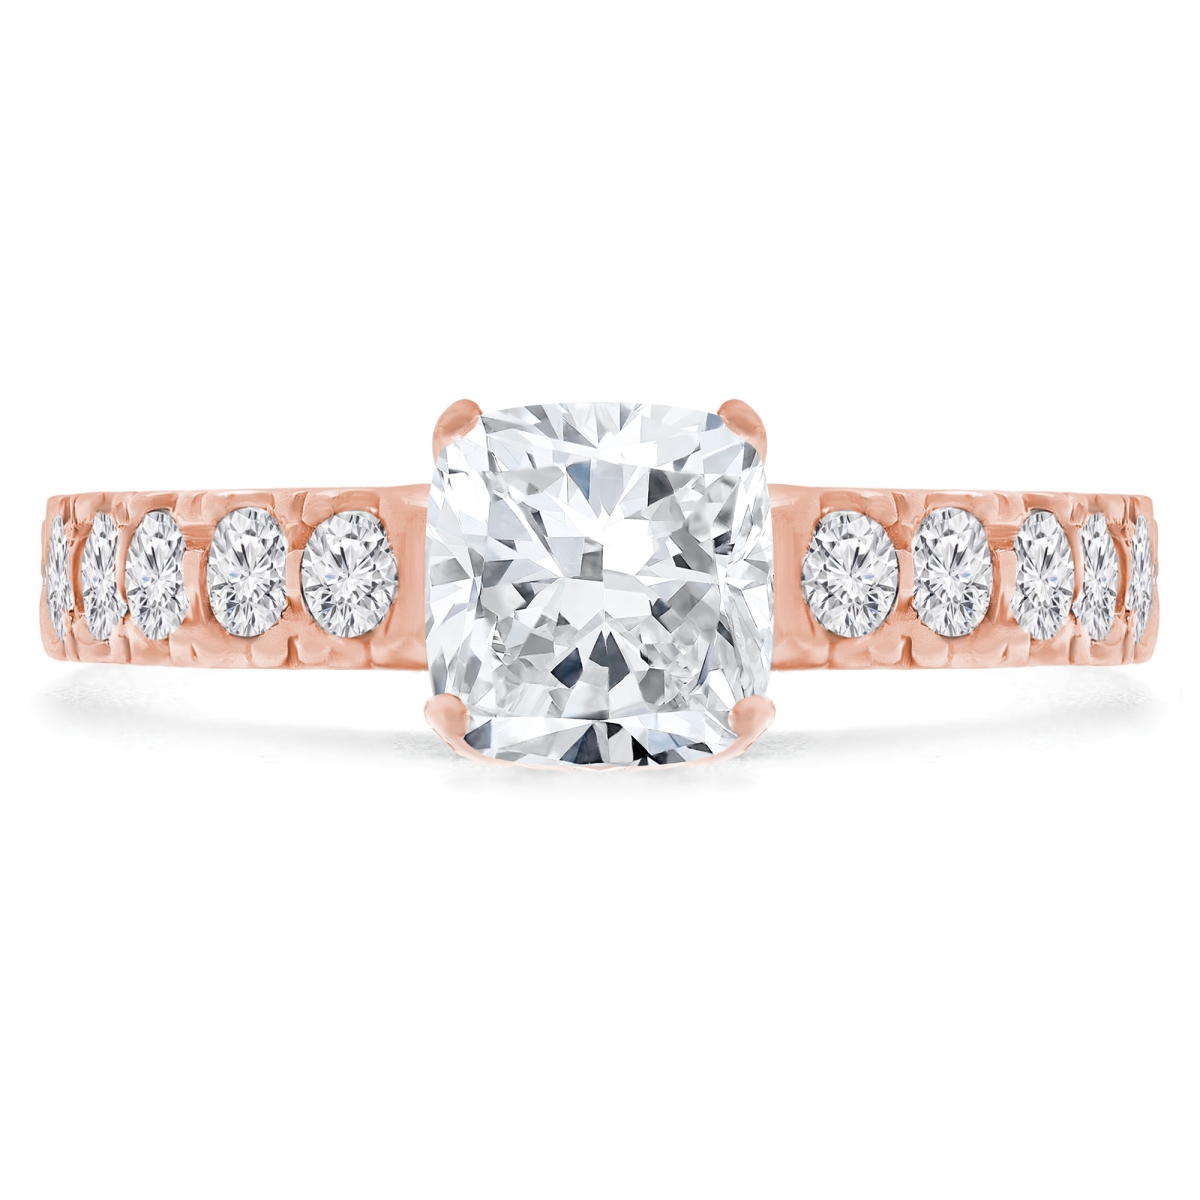 Picture of Majesty Diamonds MD240252-P 1.16 CTW Cushion Diamond Tapered Solitaire with Accents Engagement Ring in 14K Rose Gold - Size 4 to 9